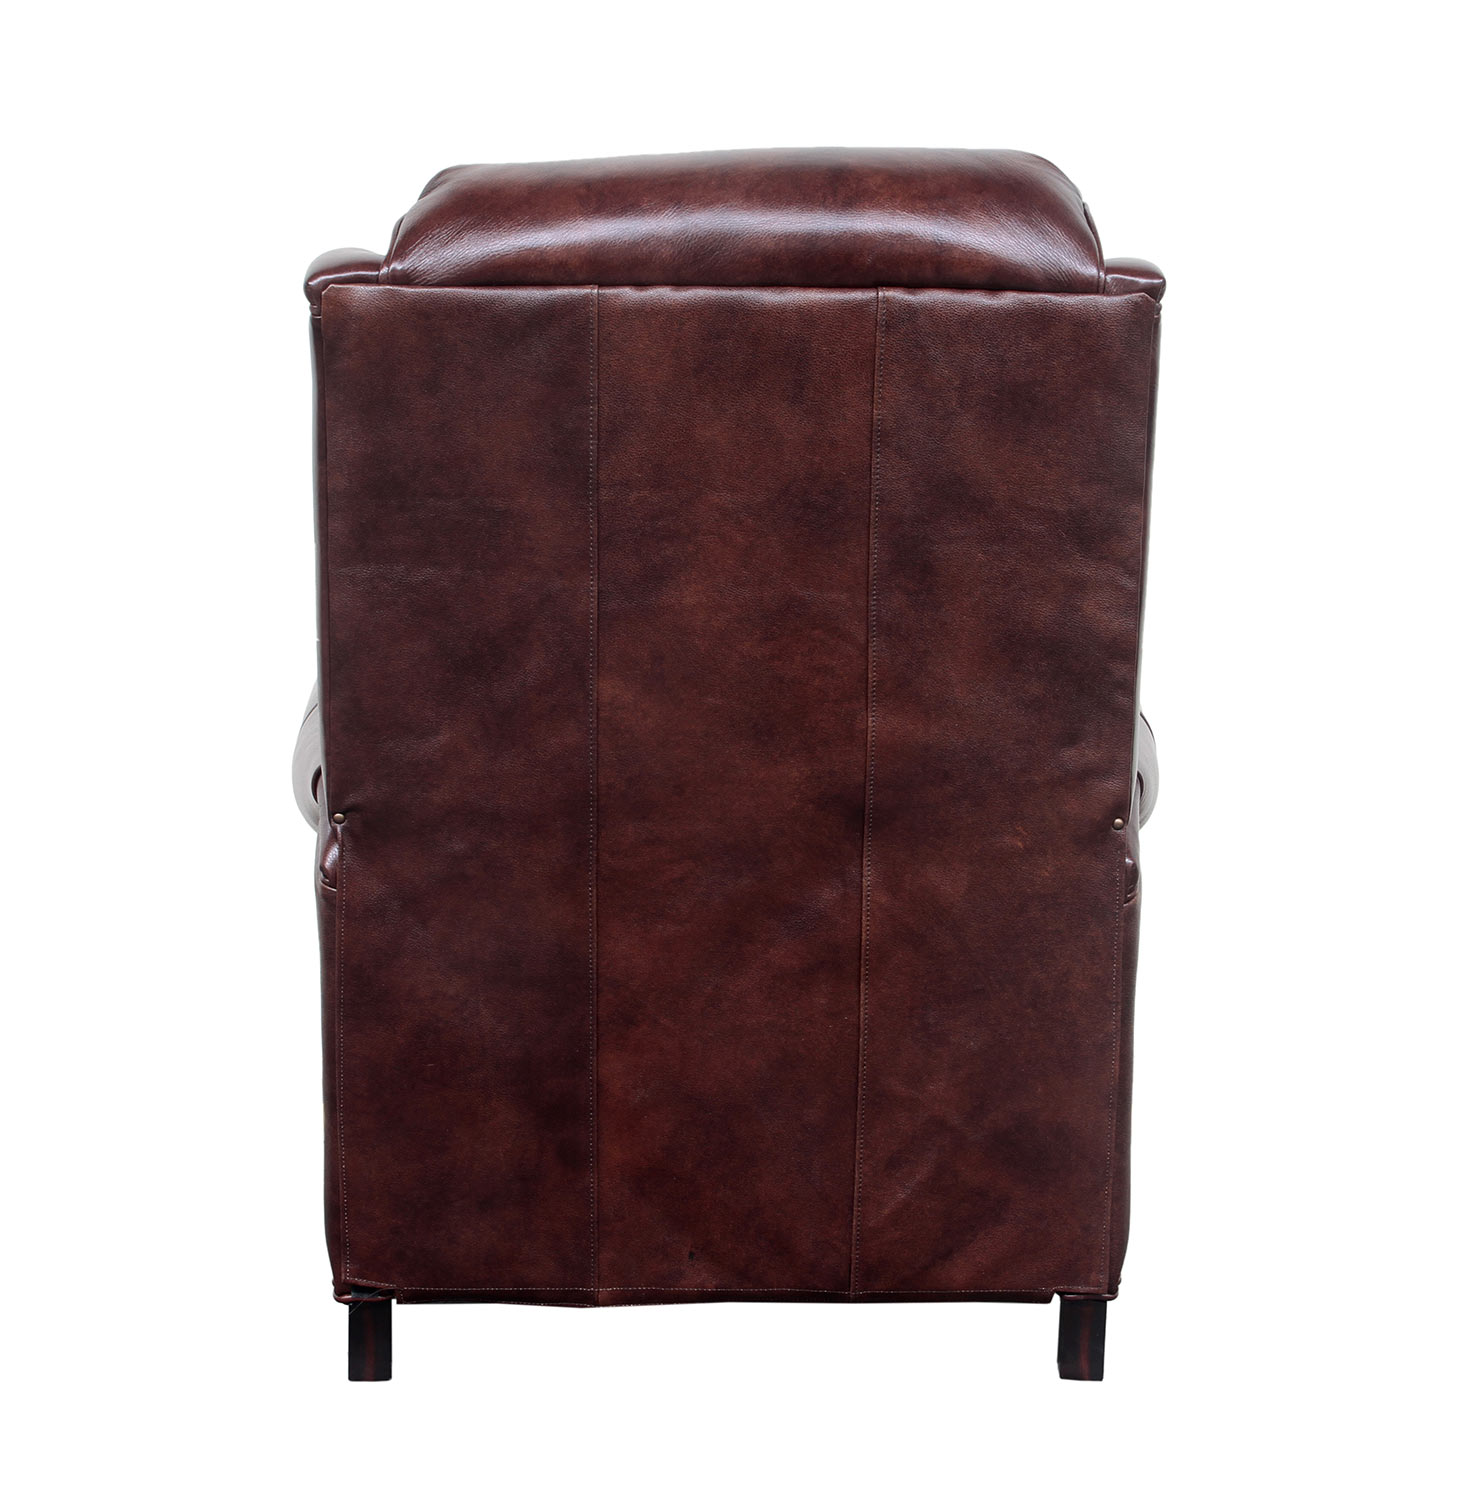 Barcalounger Meade Recliner Chair - Wenlock Fudge/all leather